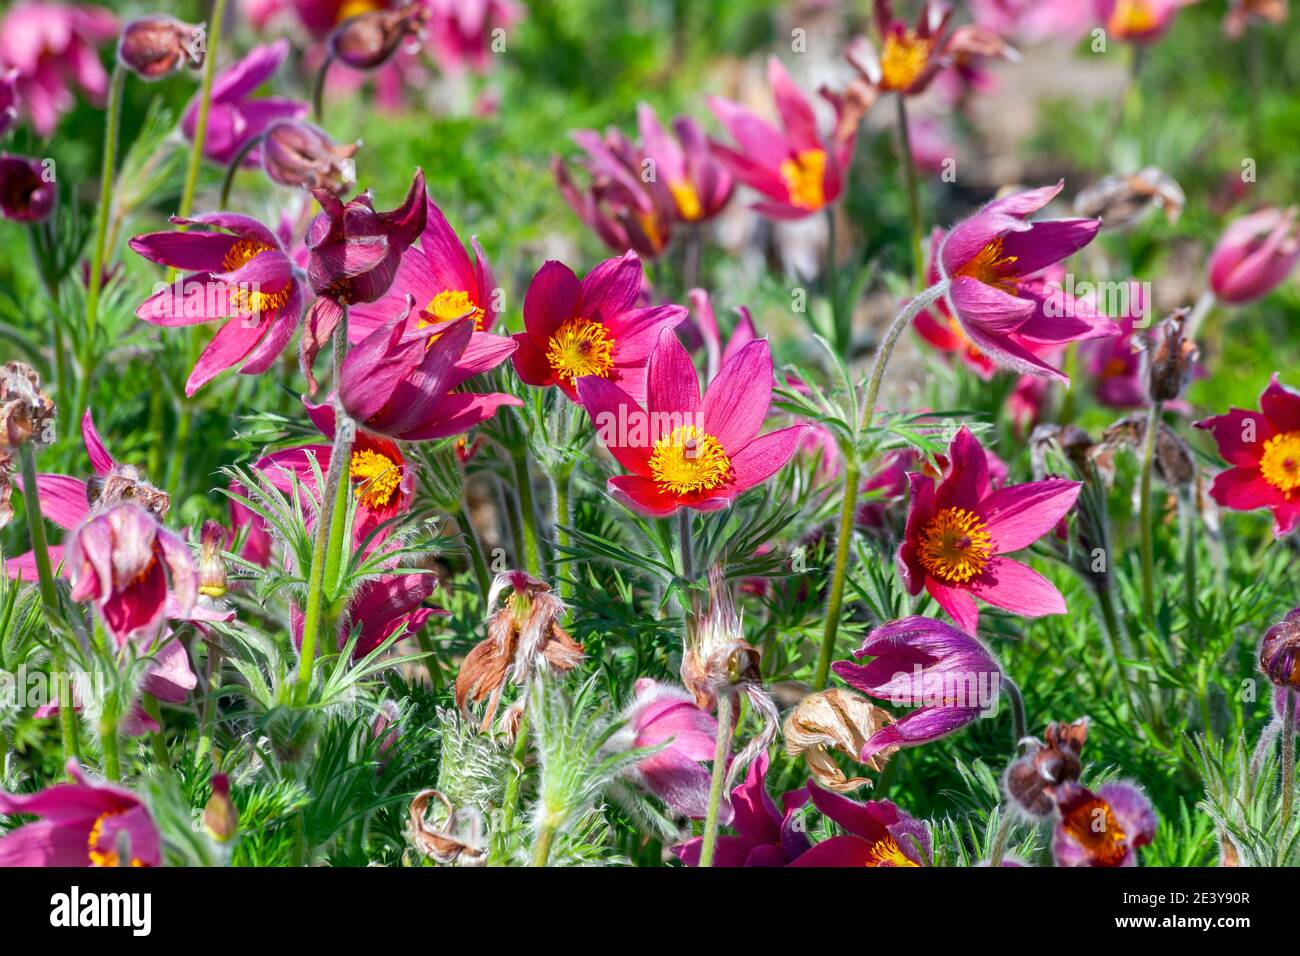 Pulsatilla vulgaris 'Rubra' a spring perennial red flowering plant commonly known as pasque flower, stock photo image Stock Photo